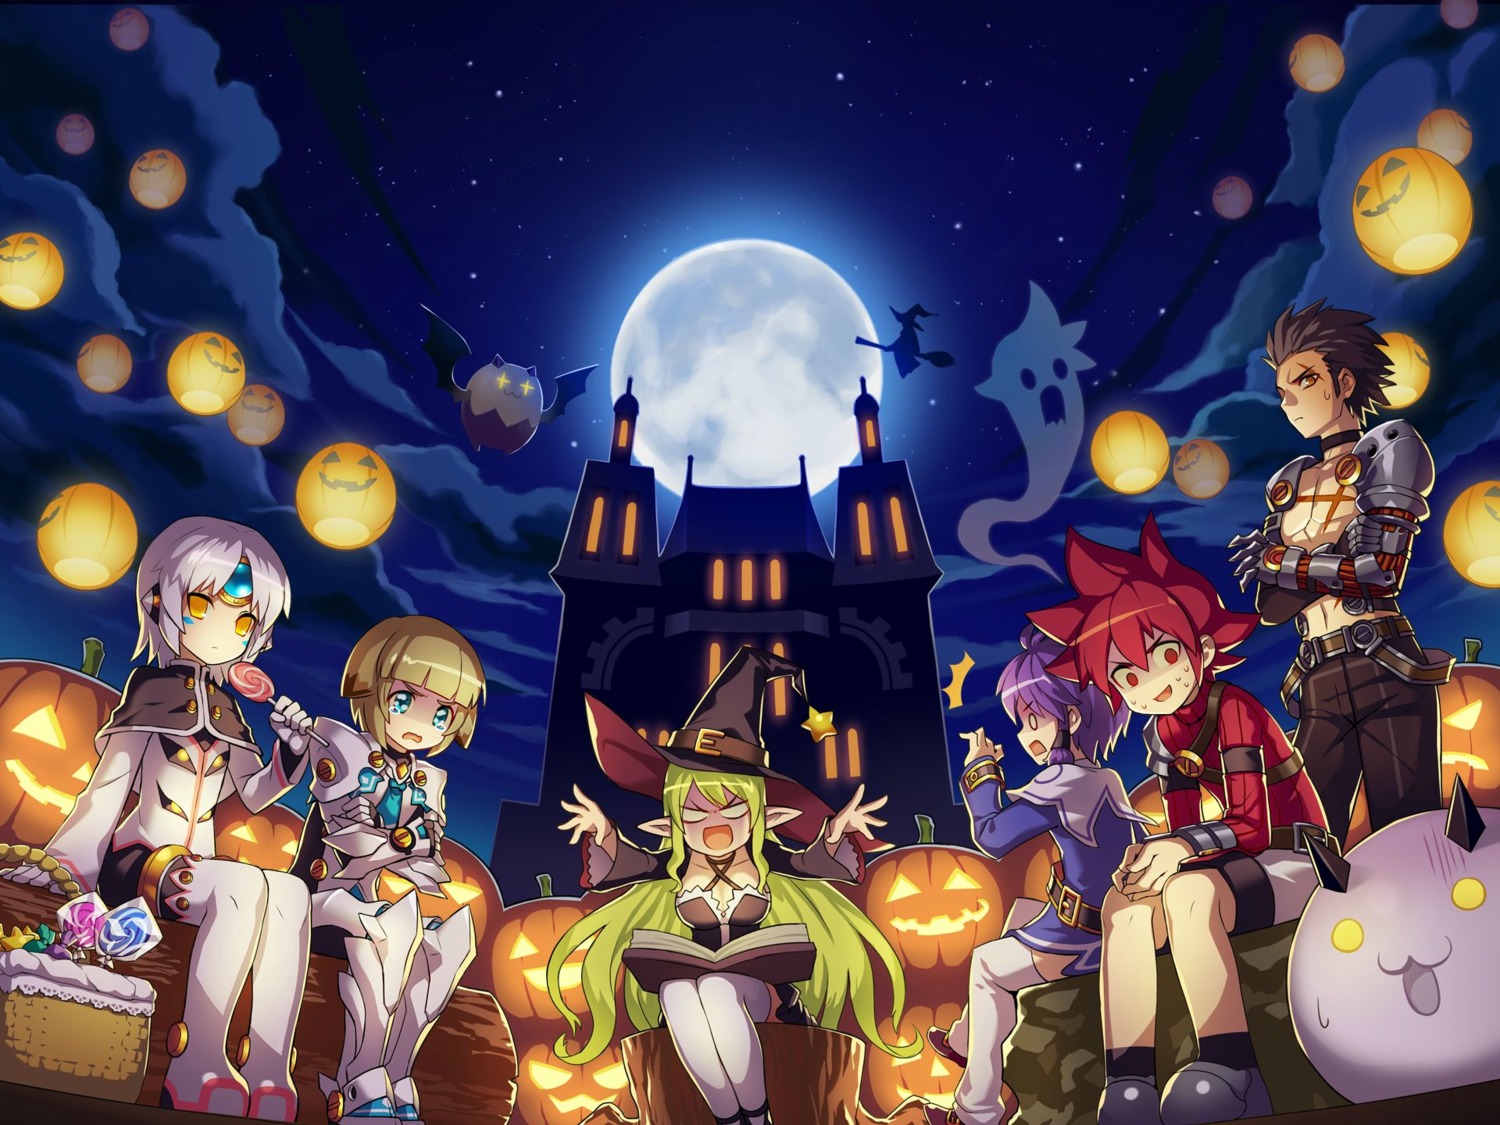 aisha_(elsword) armor chung_(elsword) cleavage elsword elsword_(elsword) eve_(elsword) halloween landscape pointy_ears raven_(elsword) rena_(elsword) tagme thighhighs witch